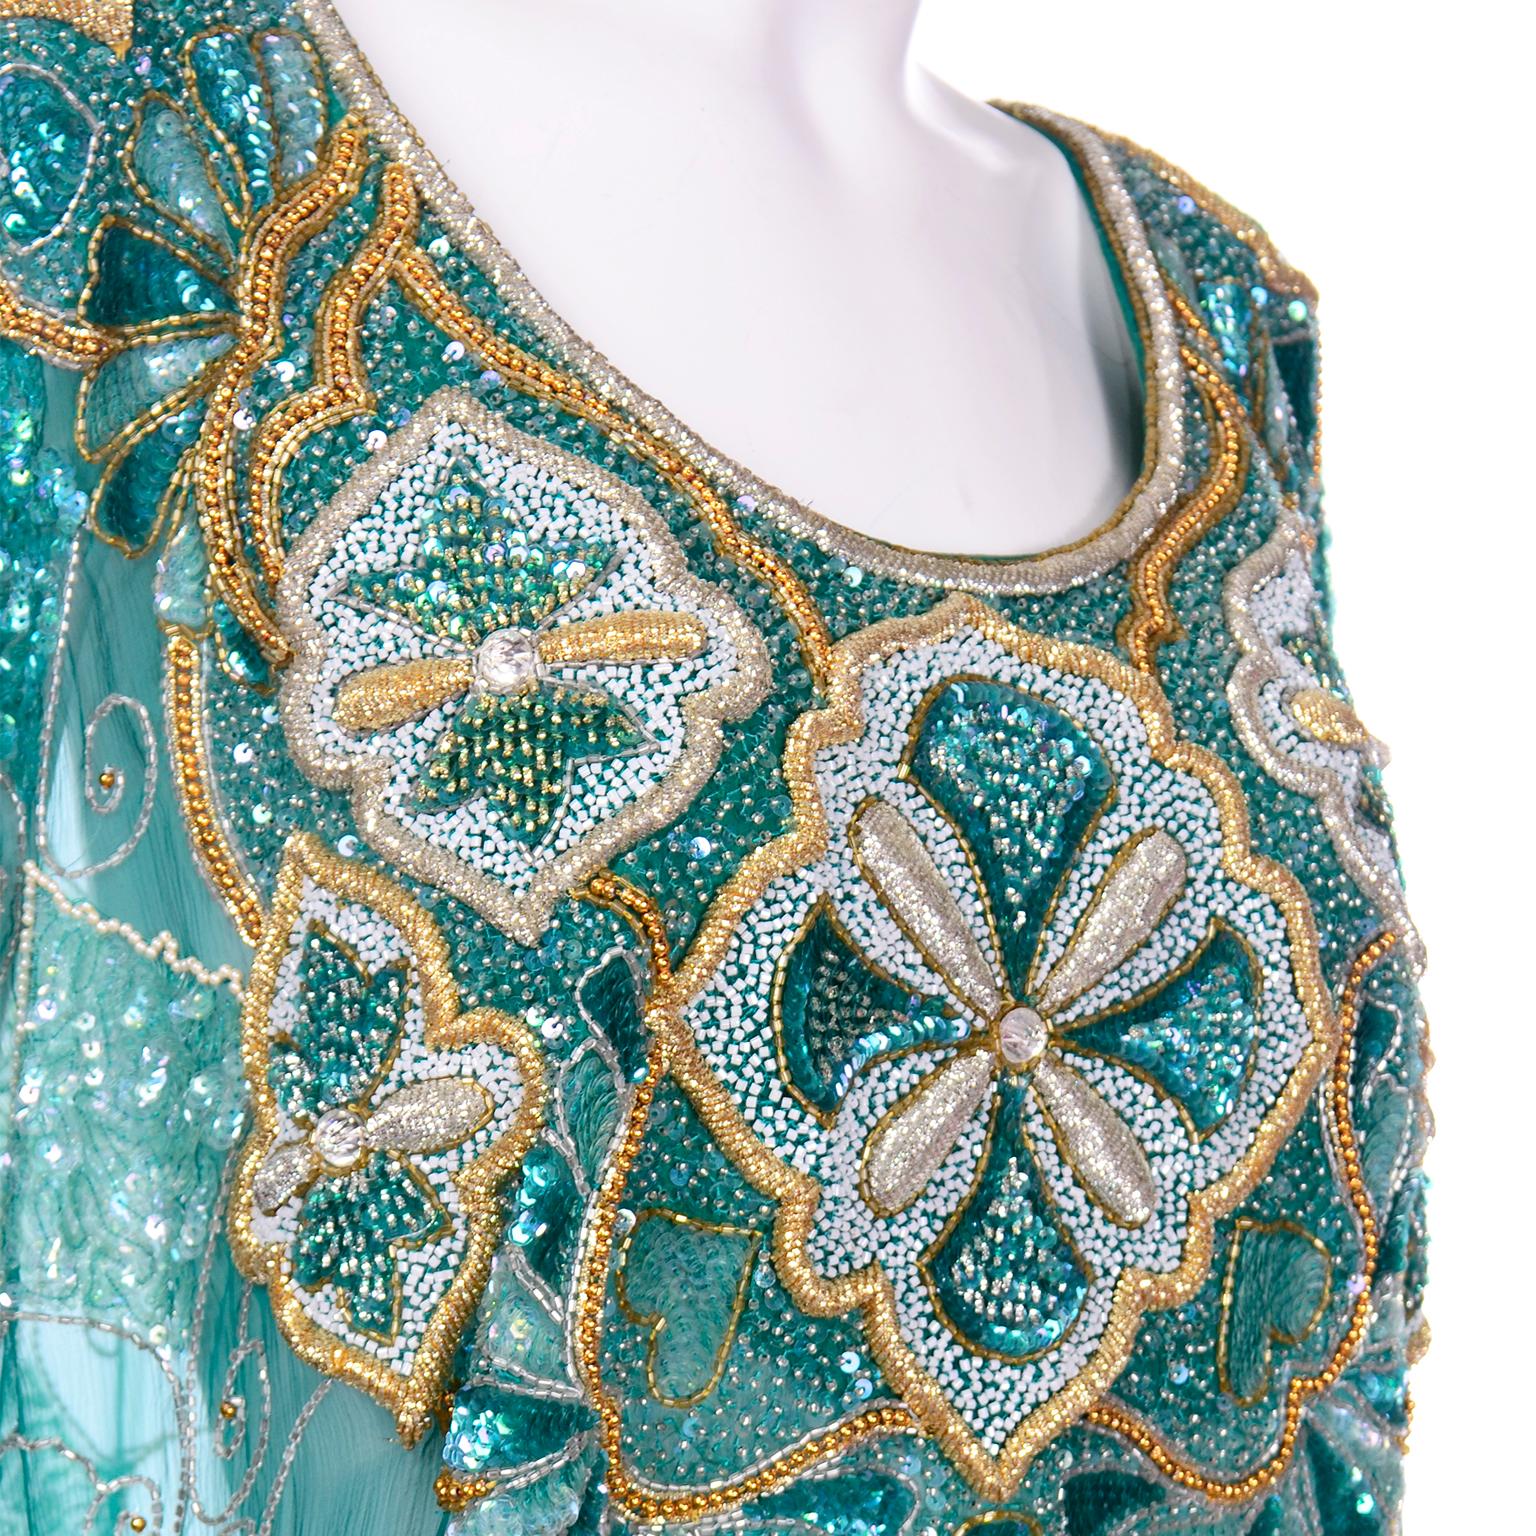 Green Beaded Silk Vintage Caftan with Gold Metallic Embroidery and Sequins 2